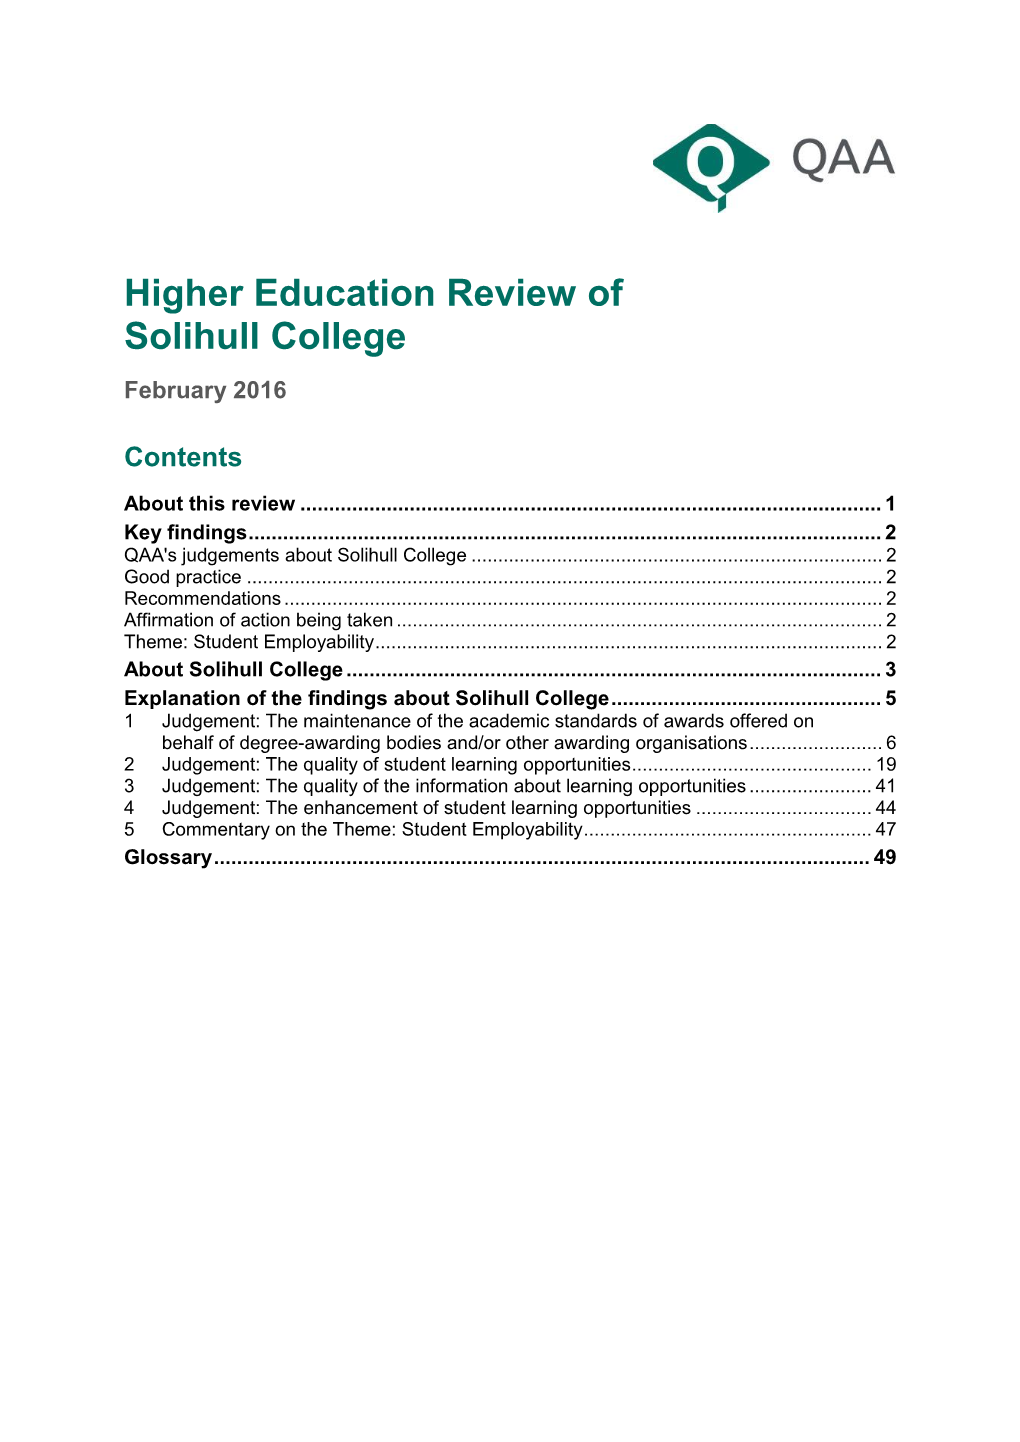 Higher Education Review of Solihull College February 2016